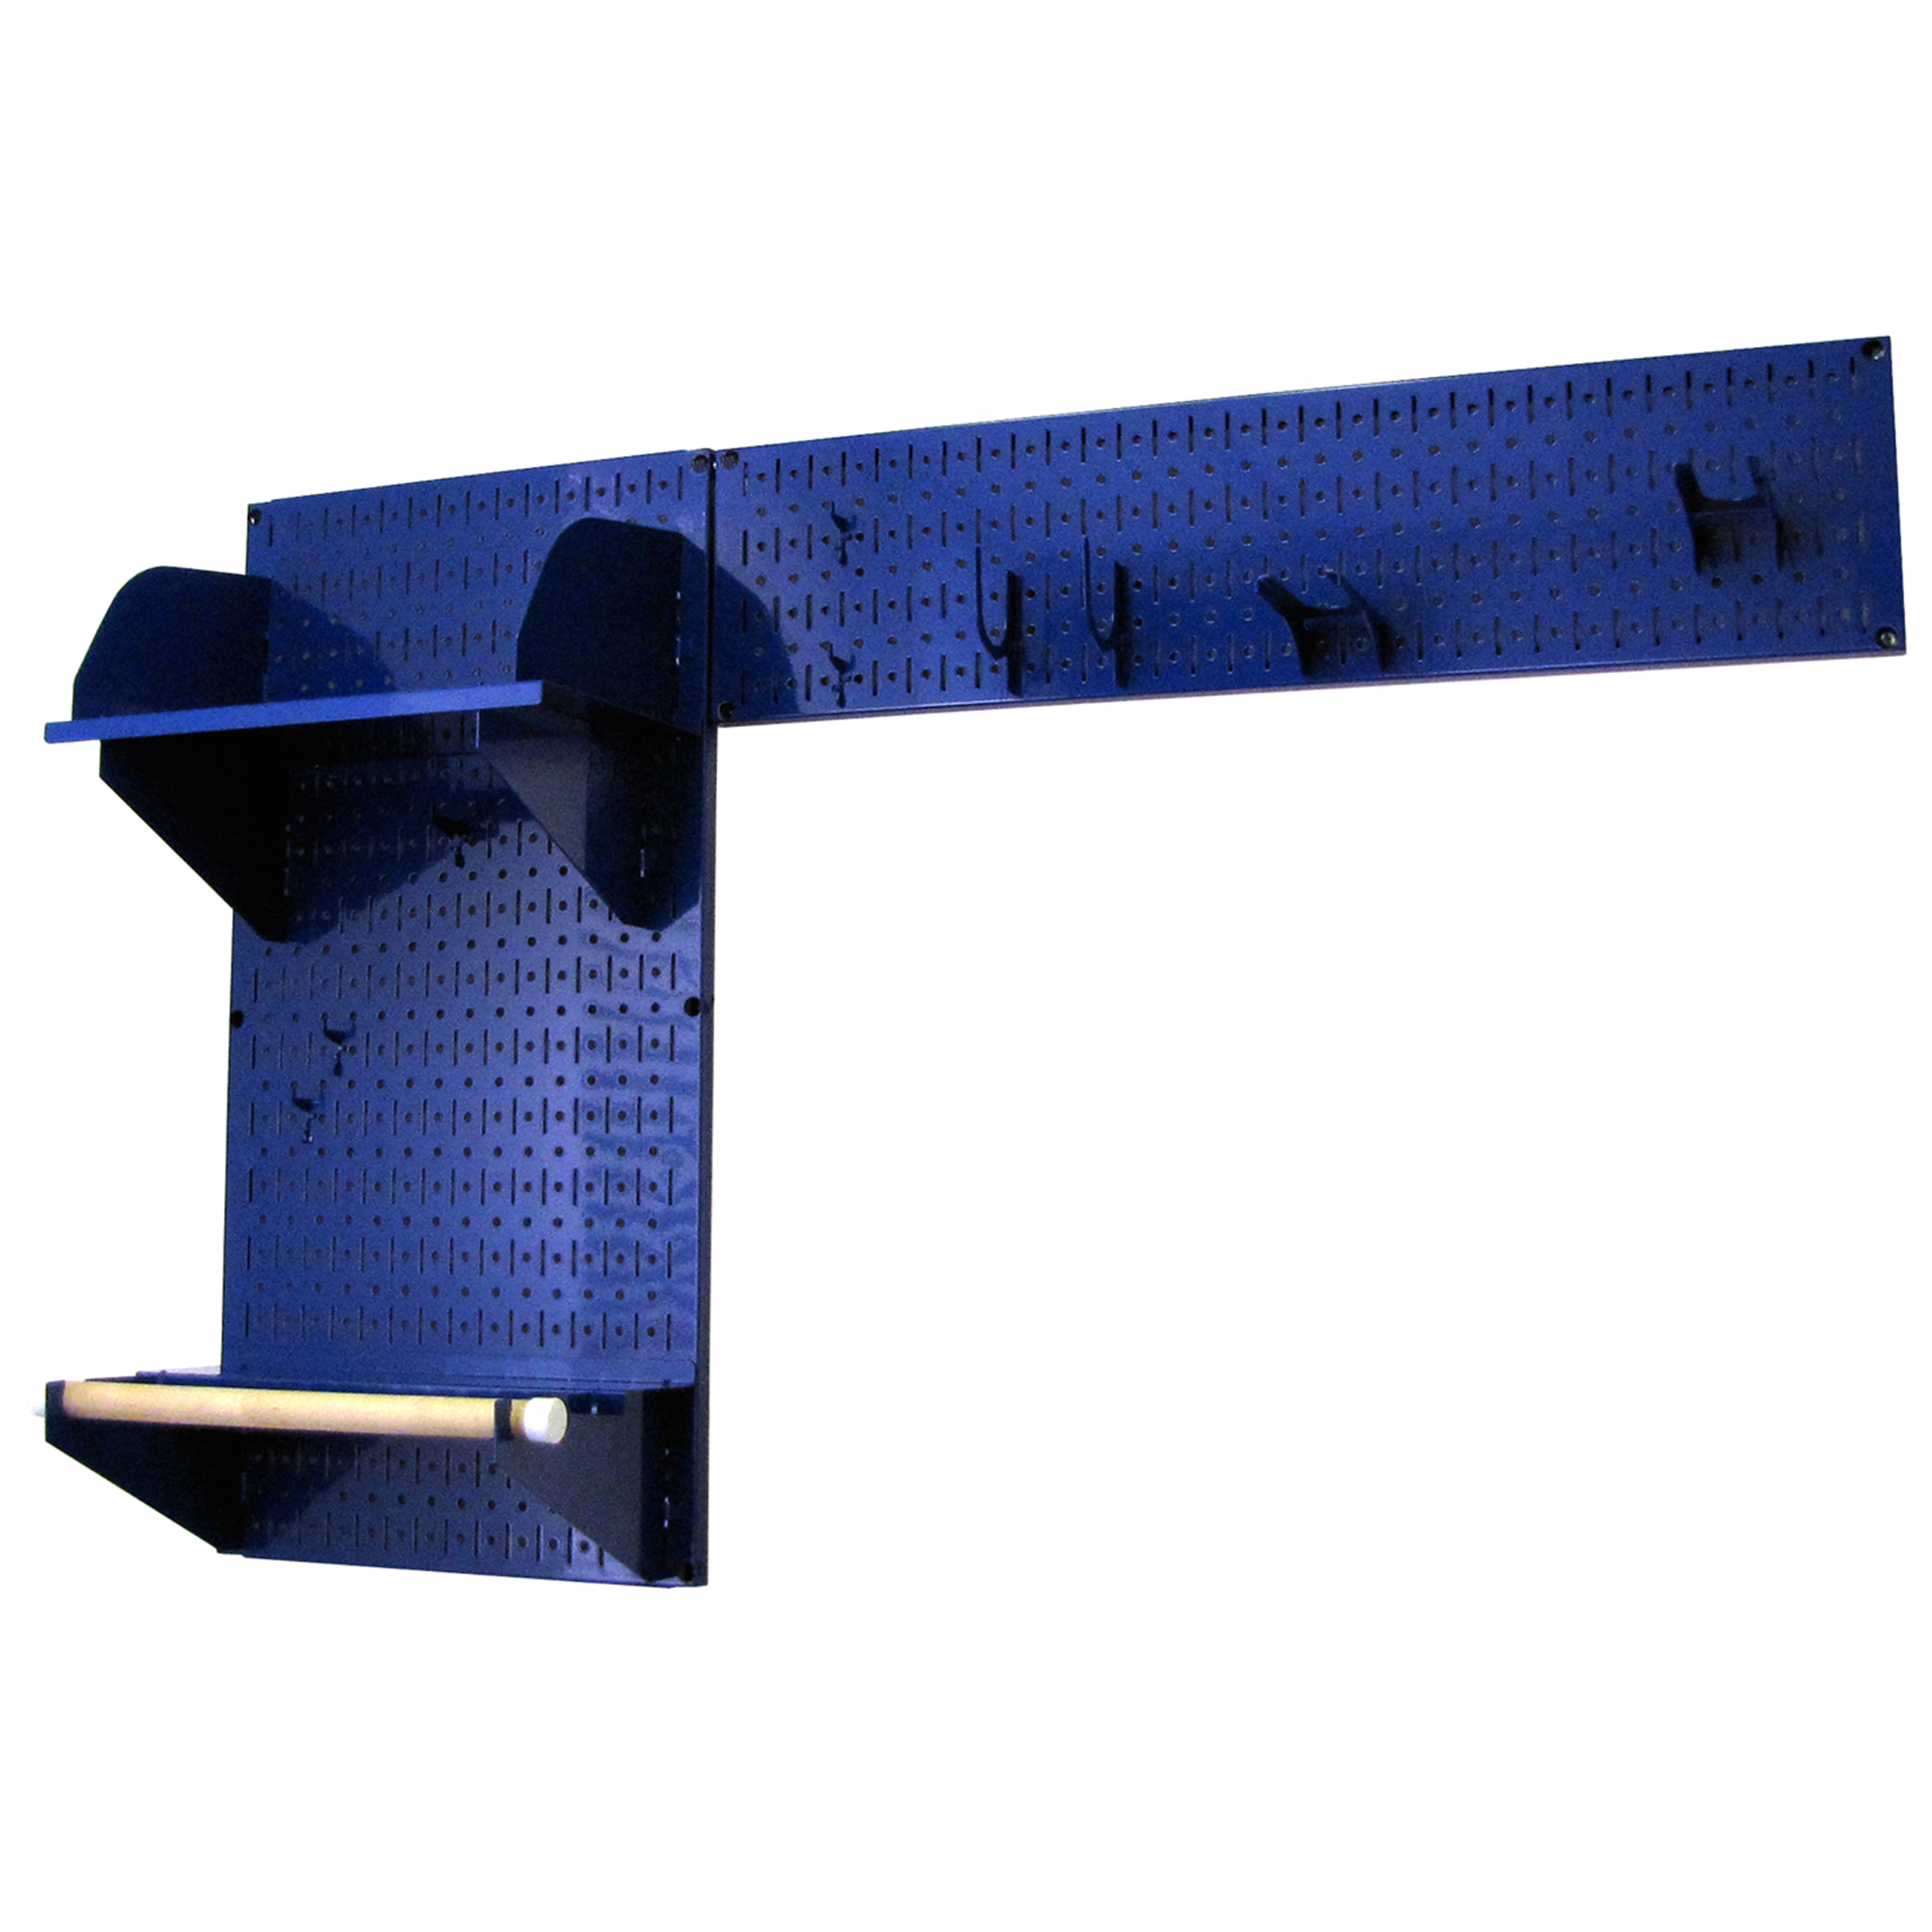 Pegboard Garden Tool Board Organizer With Blue Pegboard And Blue Accessories